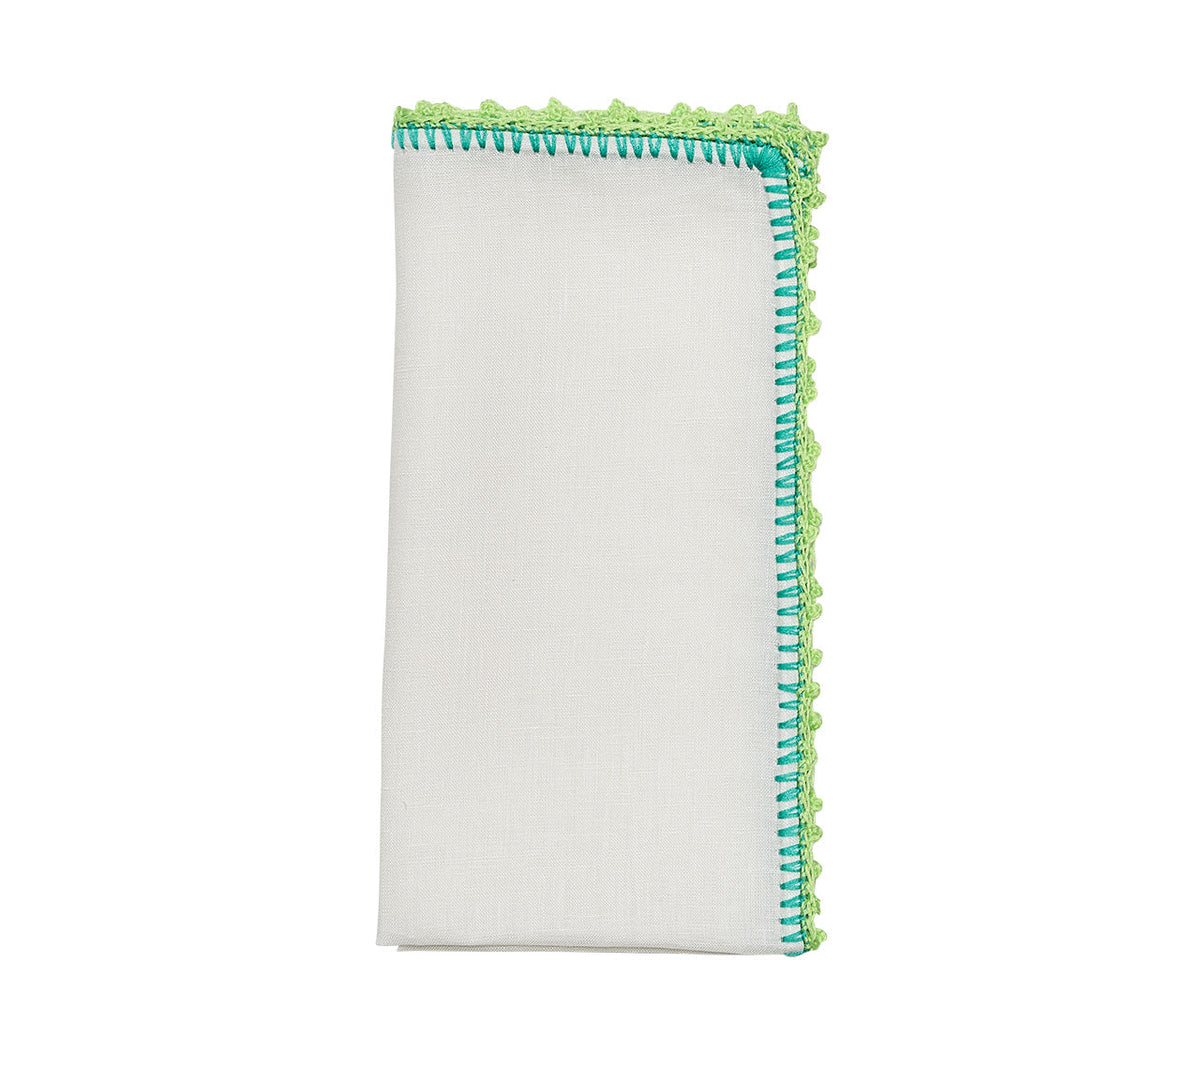 Knotted Edge Napkin in White, Marine & Lime, Set of 4